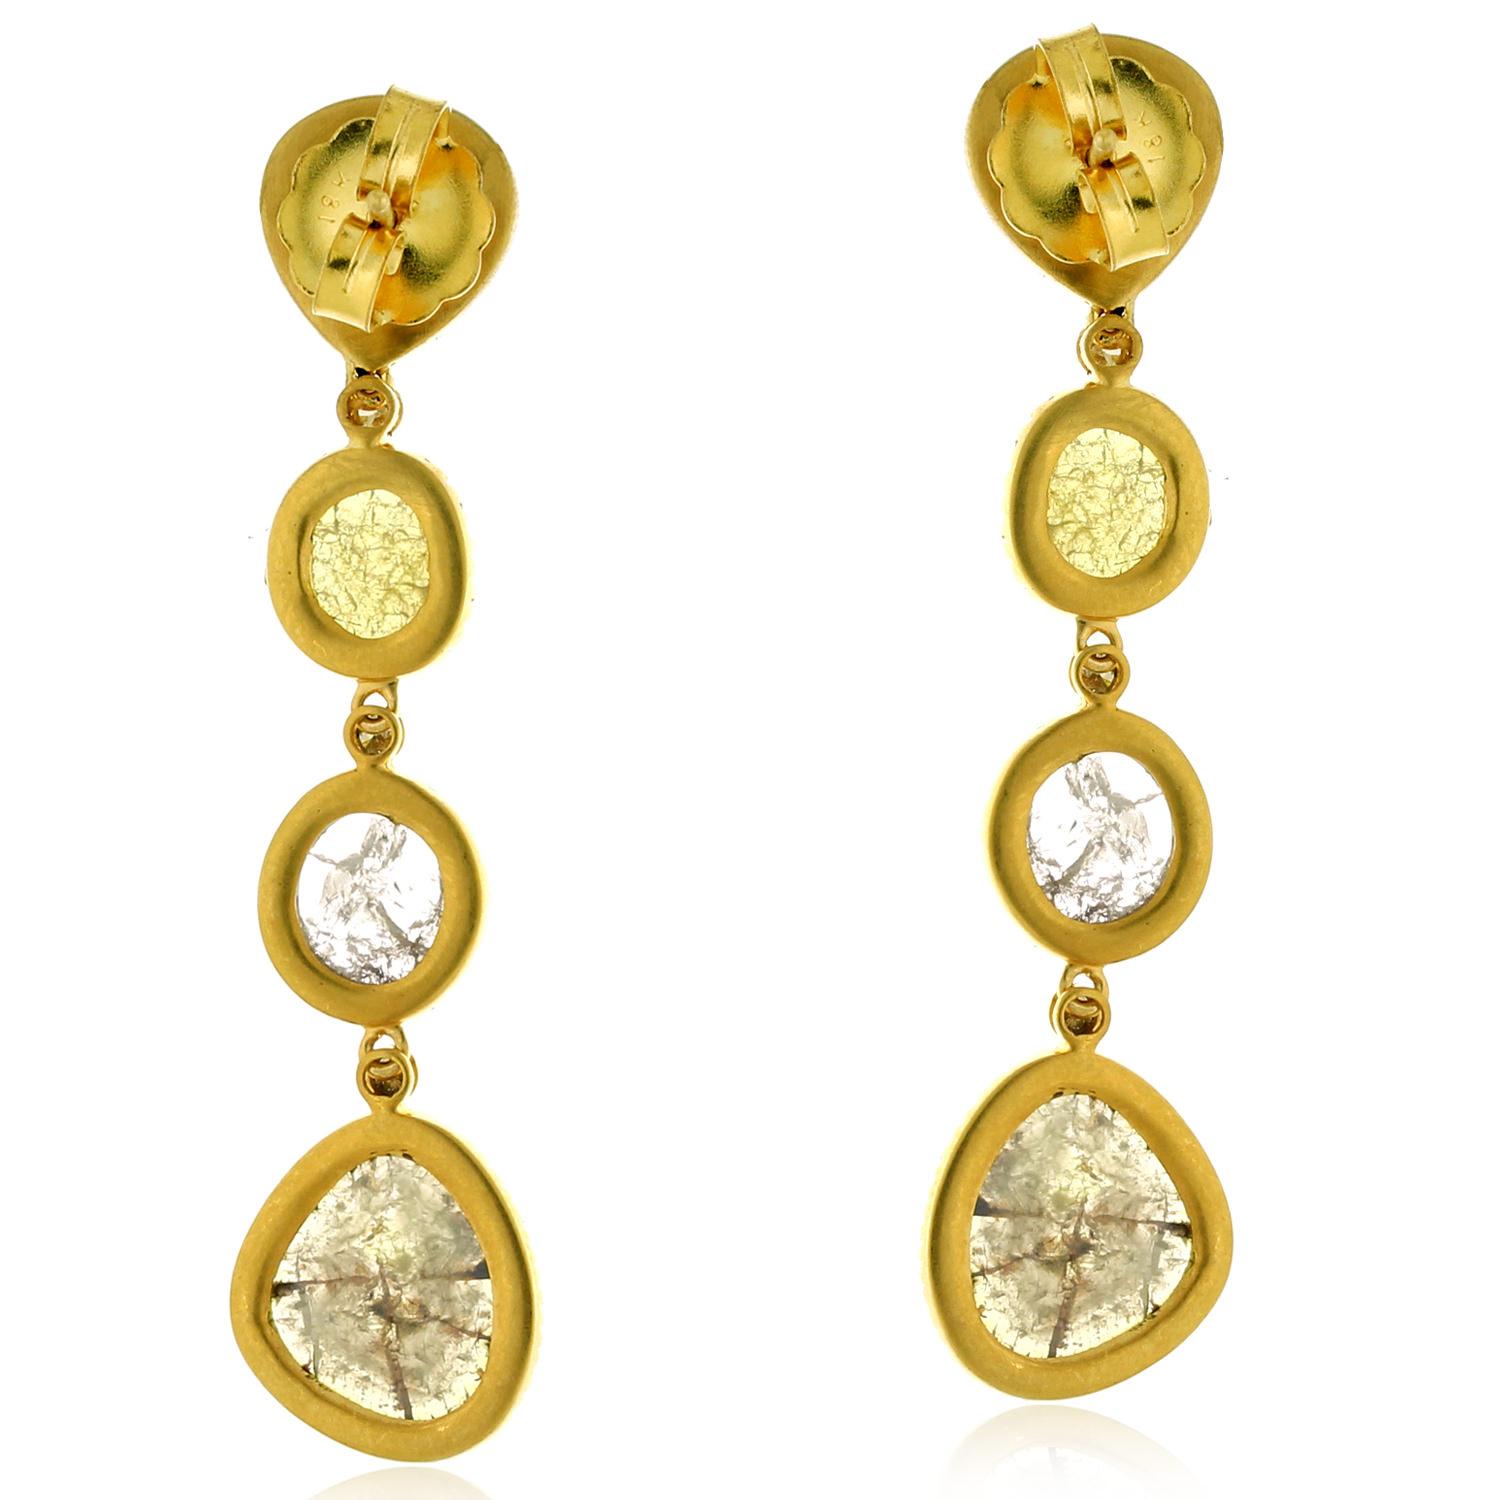 This sleek and stylish 4 Tier Slice Earring in Yellow Gold  can be worn for any formal or casual dinner.

Closure: Push Post

Gold: 18k:9.65gms
Diamond: 8.57cts